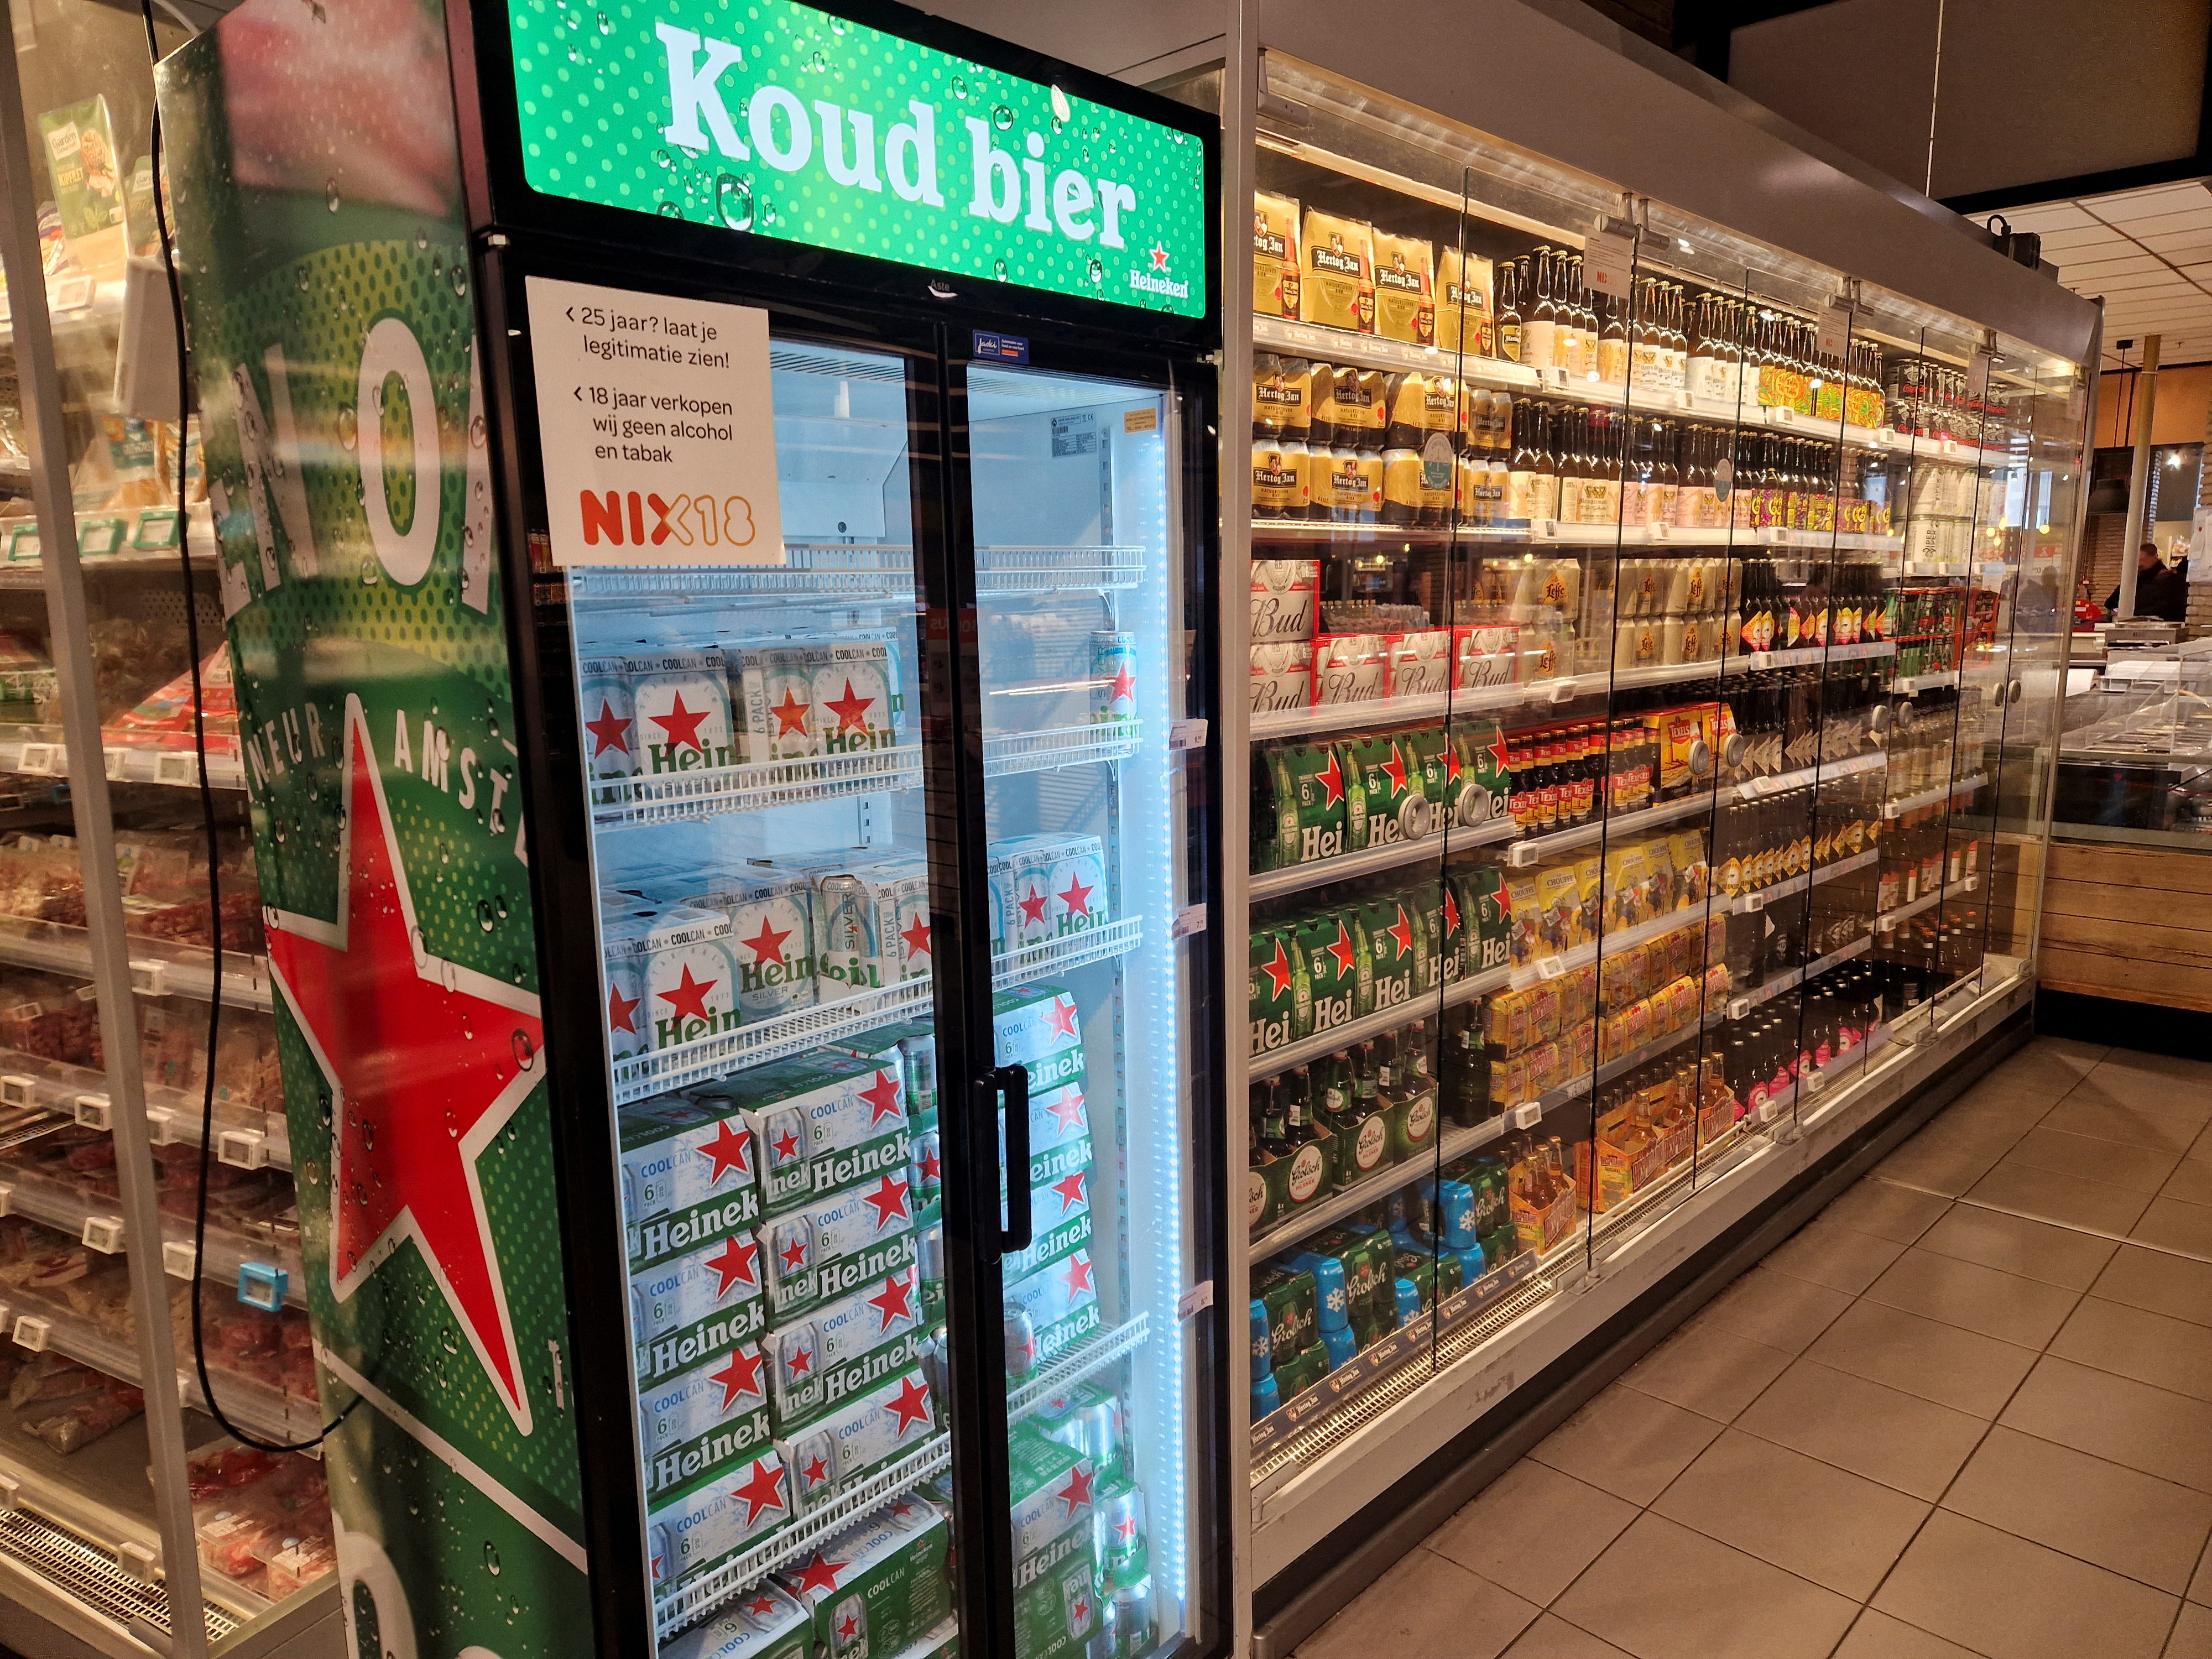 Cans of Heineken Silver are seen on display at a supermarket in Amsterdam